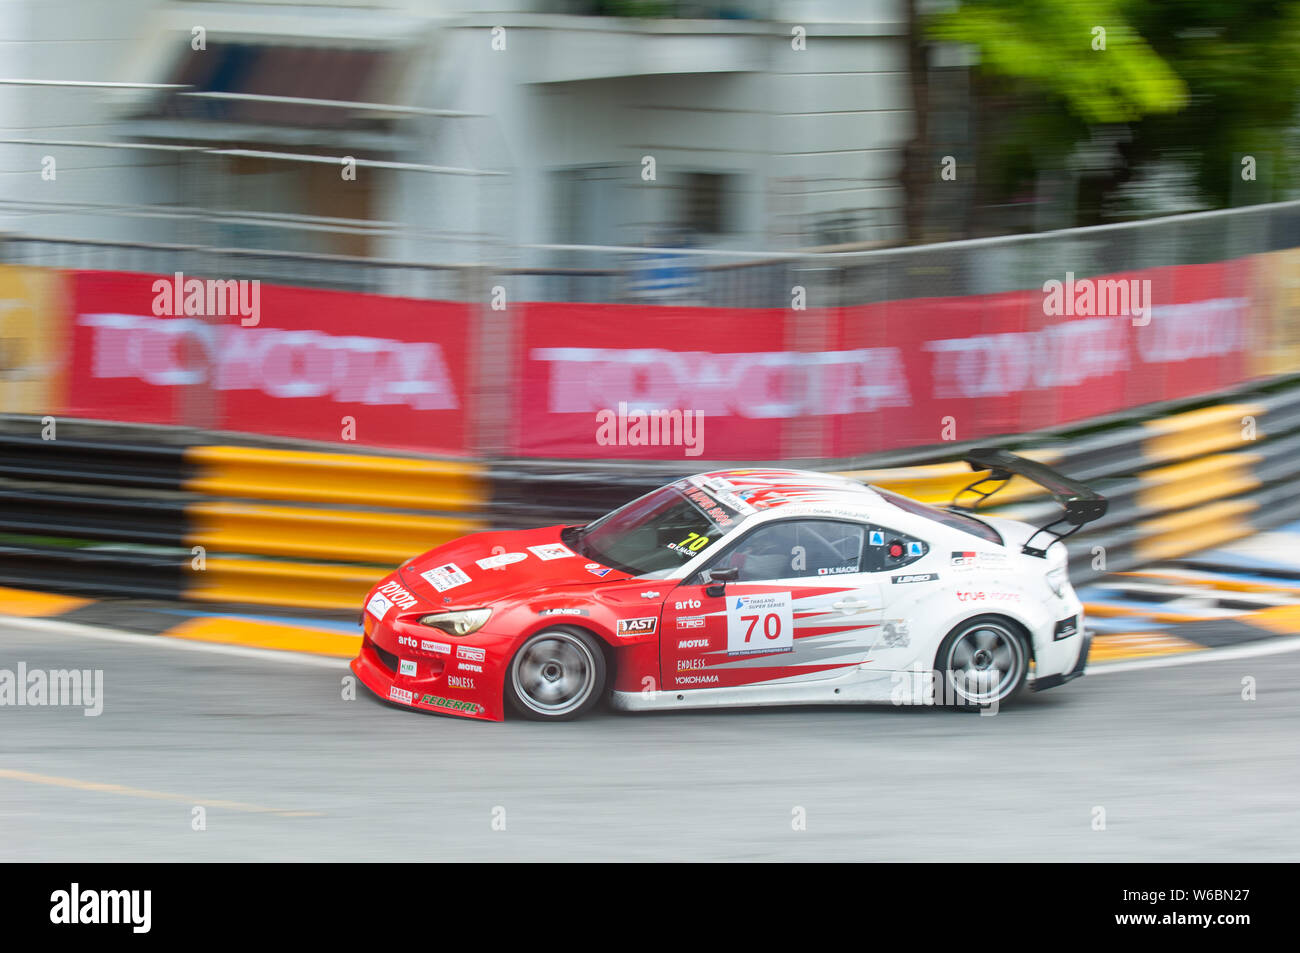 Bang Saen, Thailand - July 1, 2017: The Toyota 86 of Kawamura Naoki from Japan competing in the Super 2000 class during Thailand Super Series at Bang Stock Photo